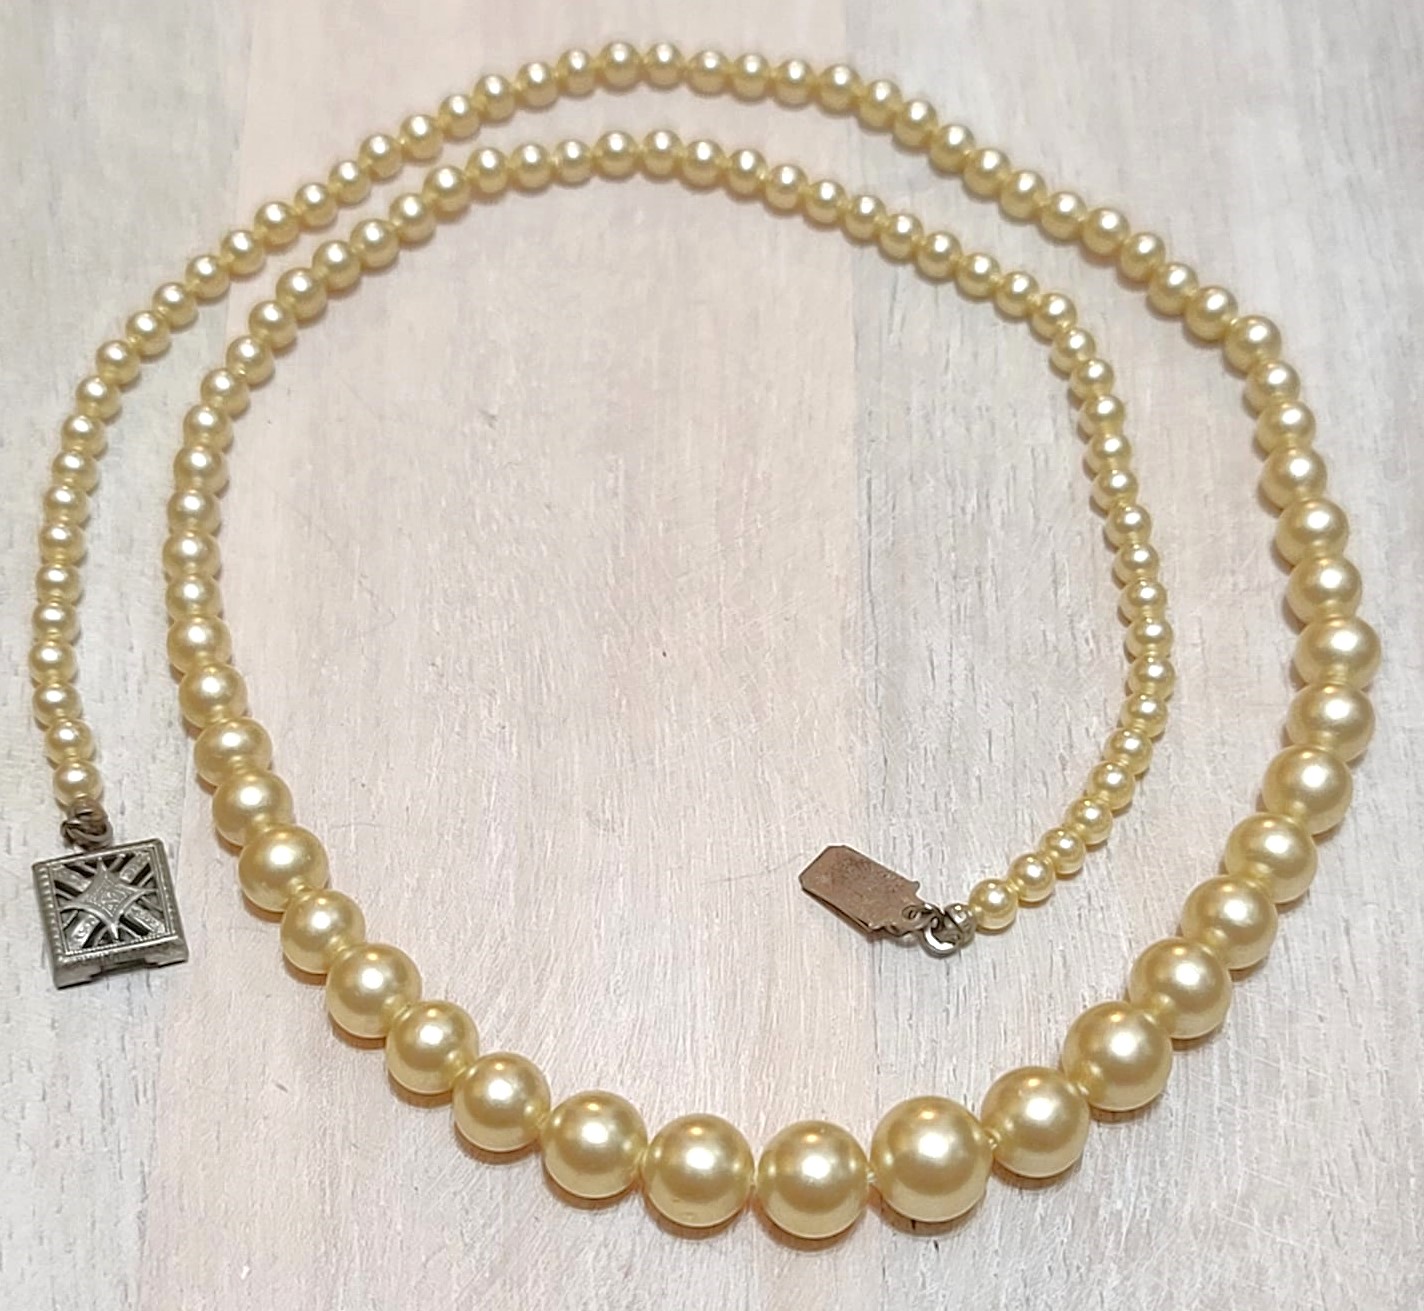 Pearl necklace, vintage, petite necklace, graduated costume pearls with box clasp